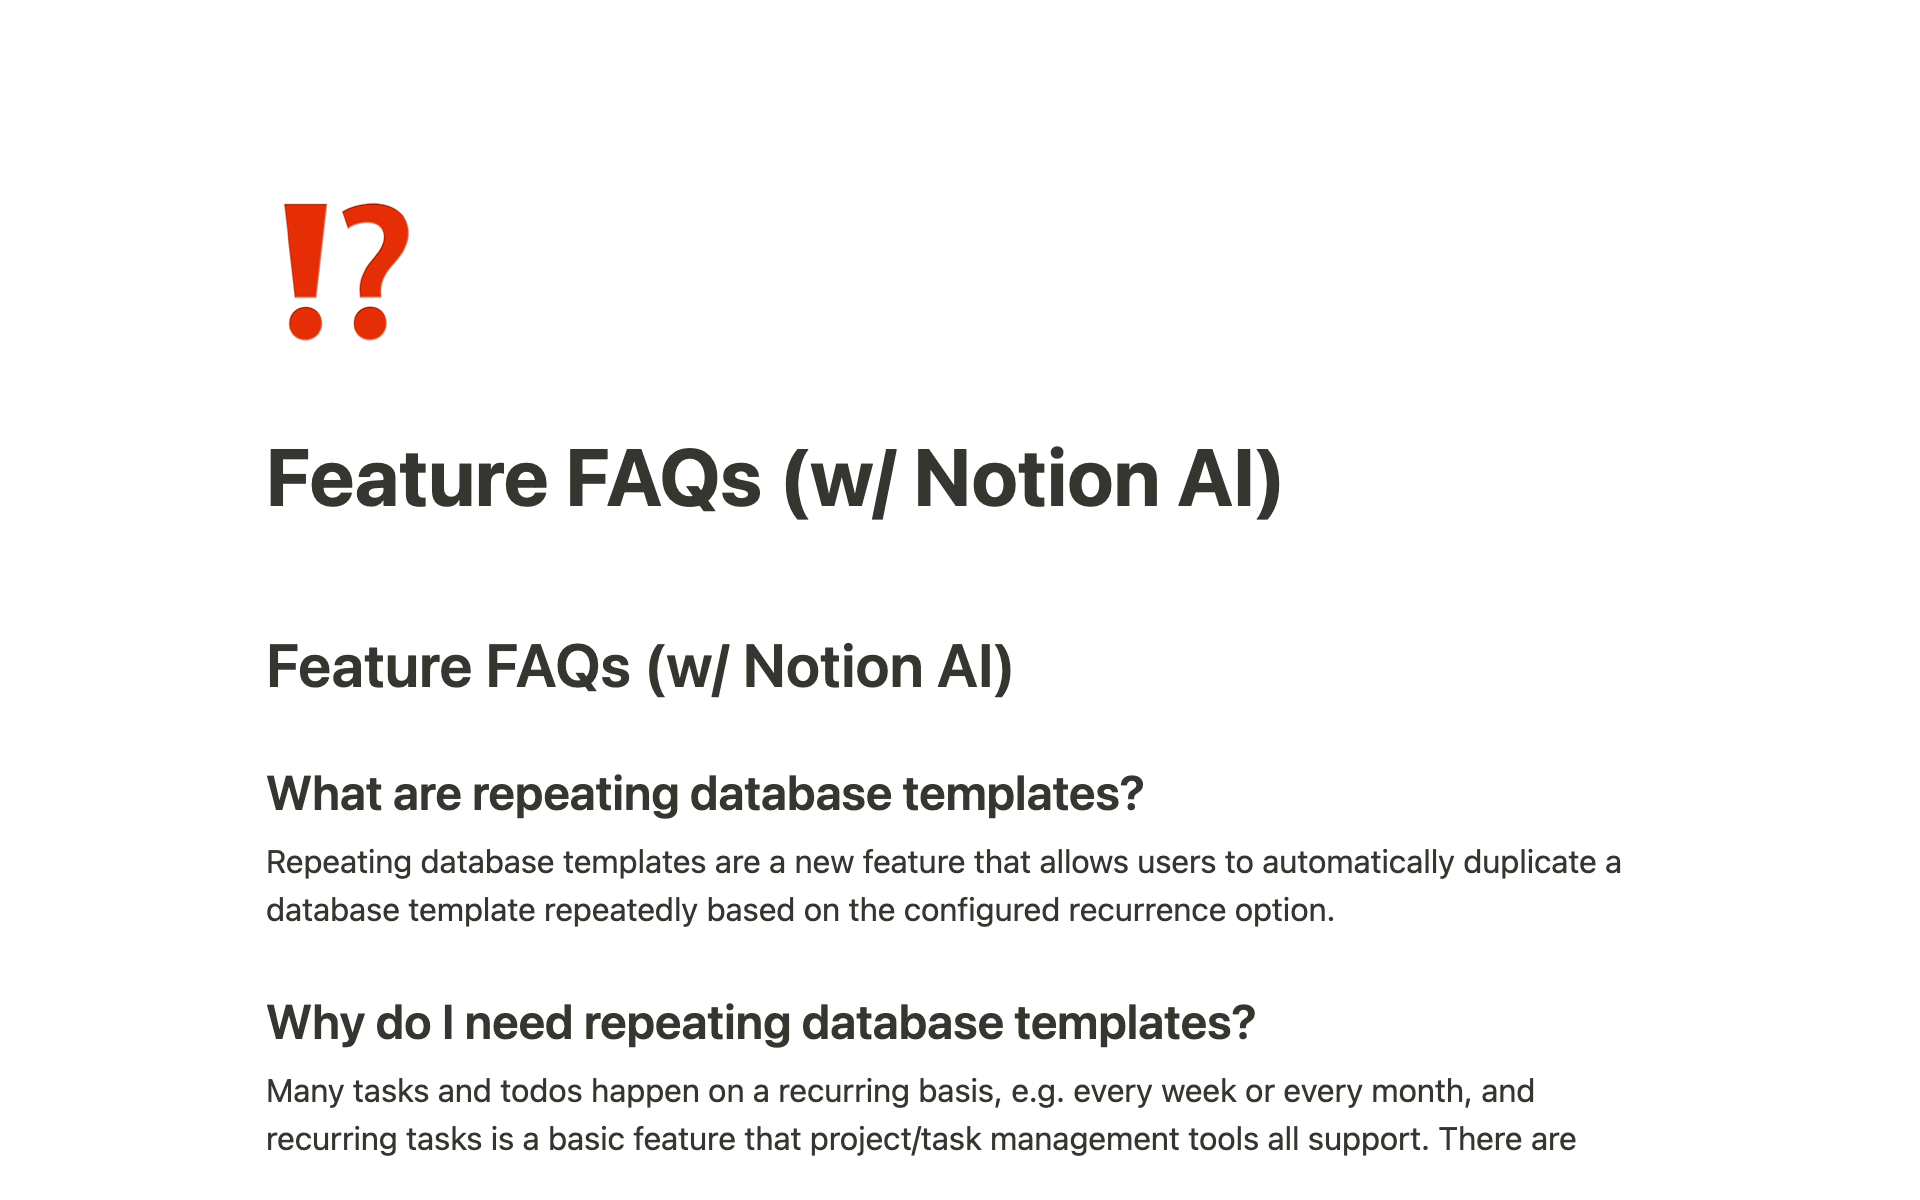 When you launch a new feature, your customers are going to have a lot of questions. Let Notion AI brainstorm ideas for you.